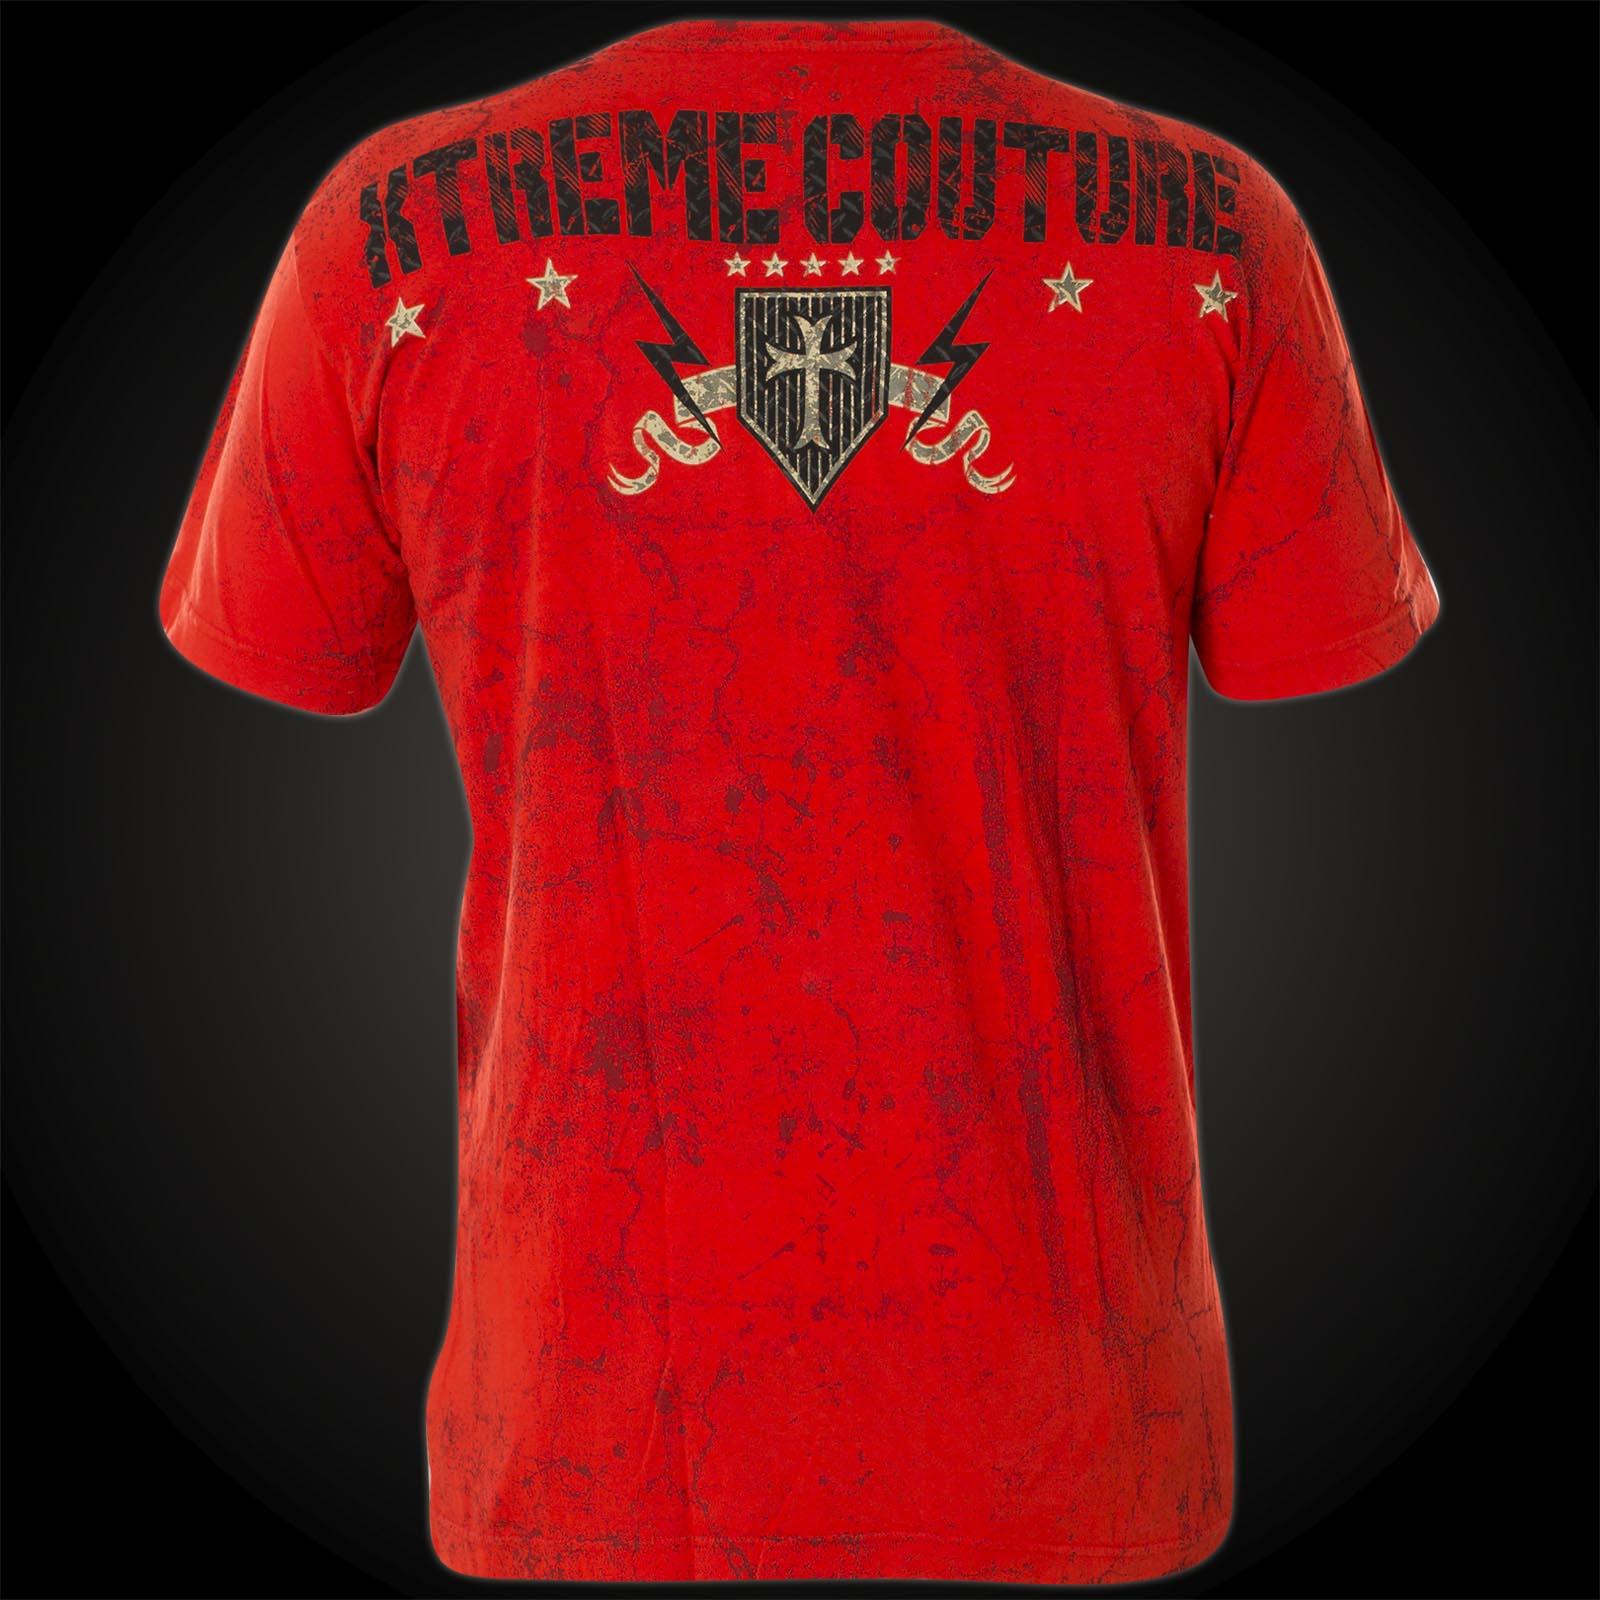 Xtreme Couture by Affliction Killzone with a large bird of prey print